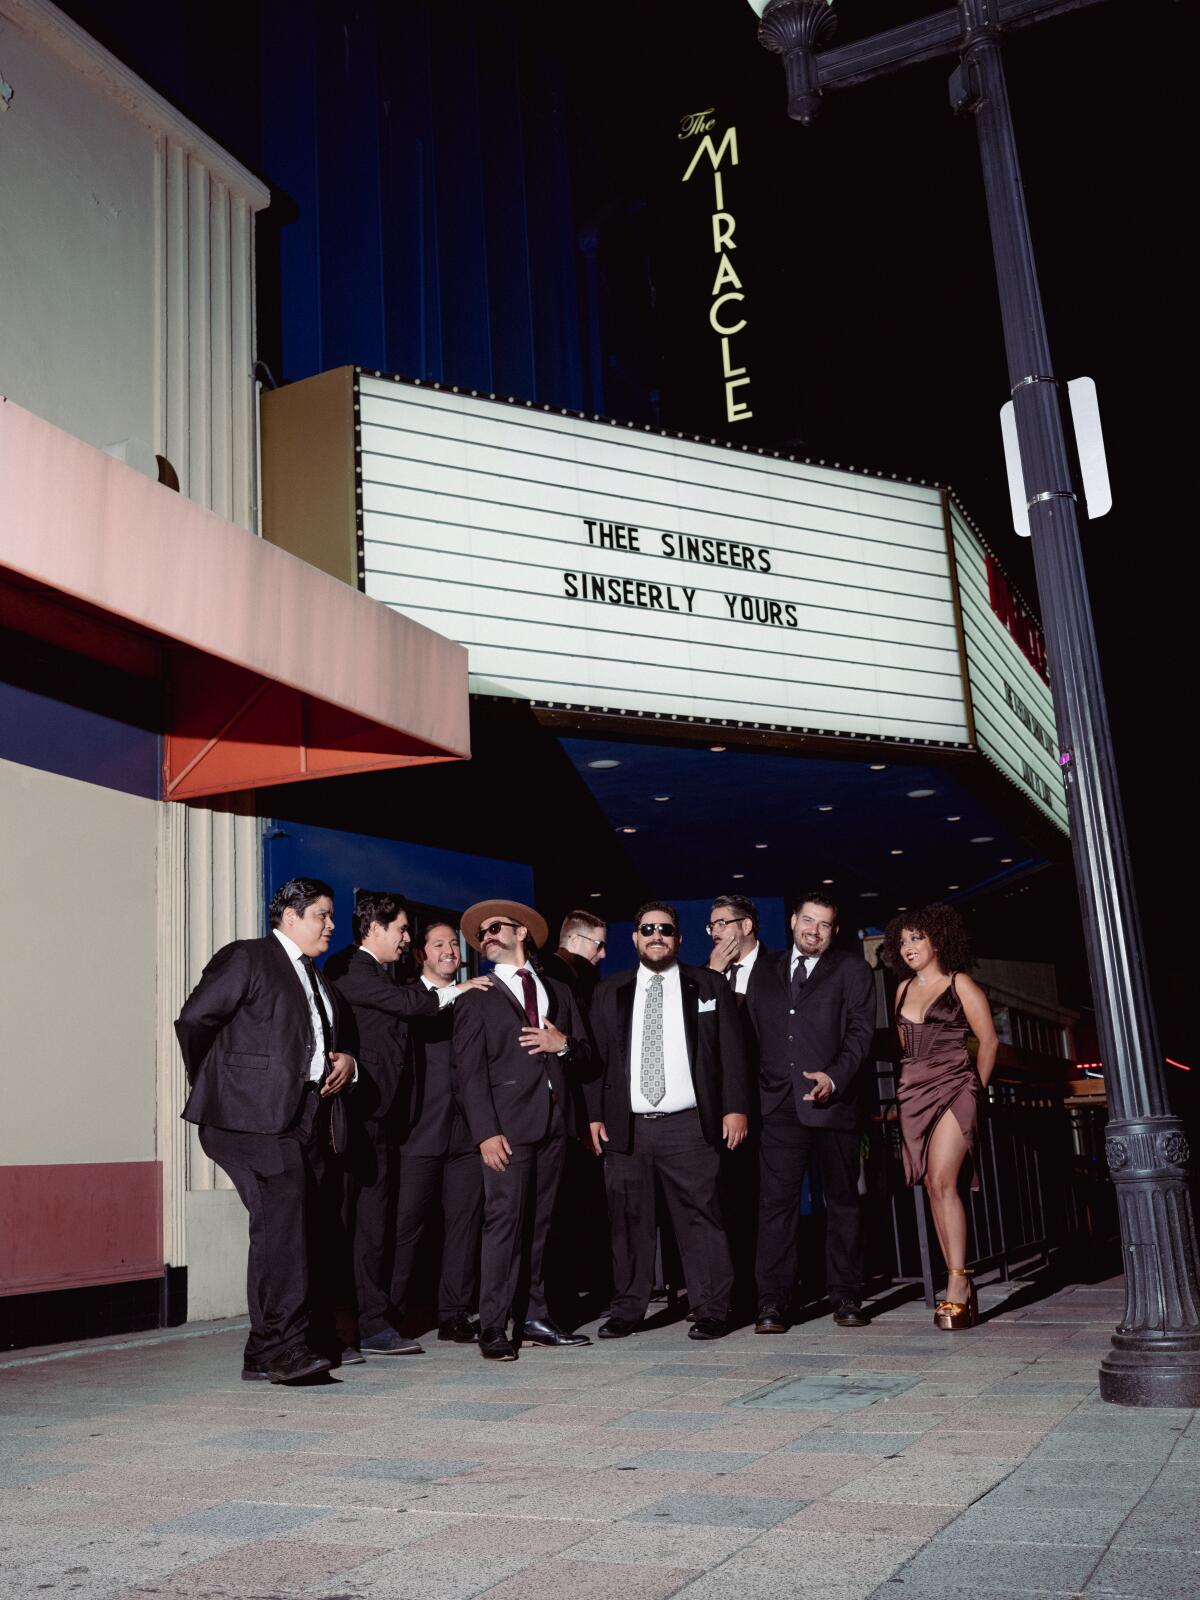 A group of people stands on a sidewalk outside a theater